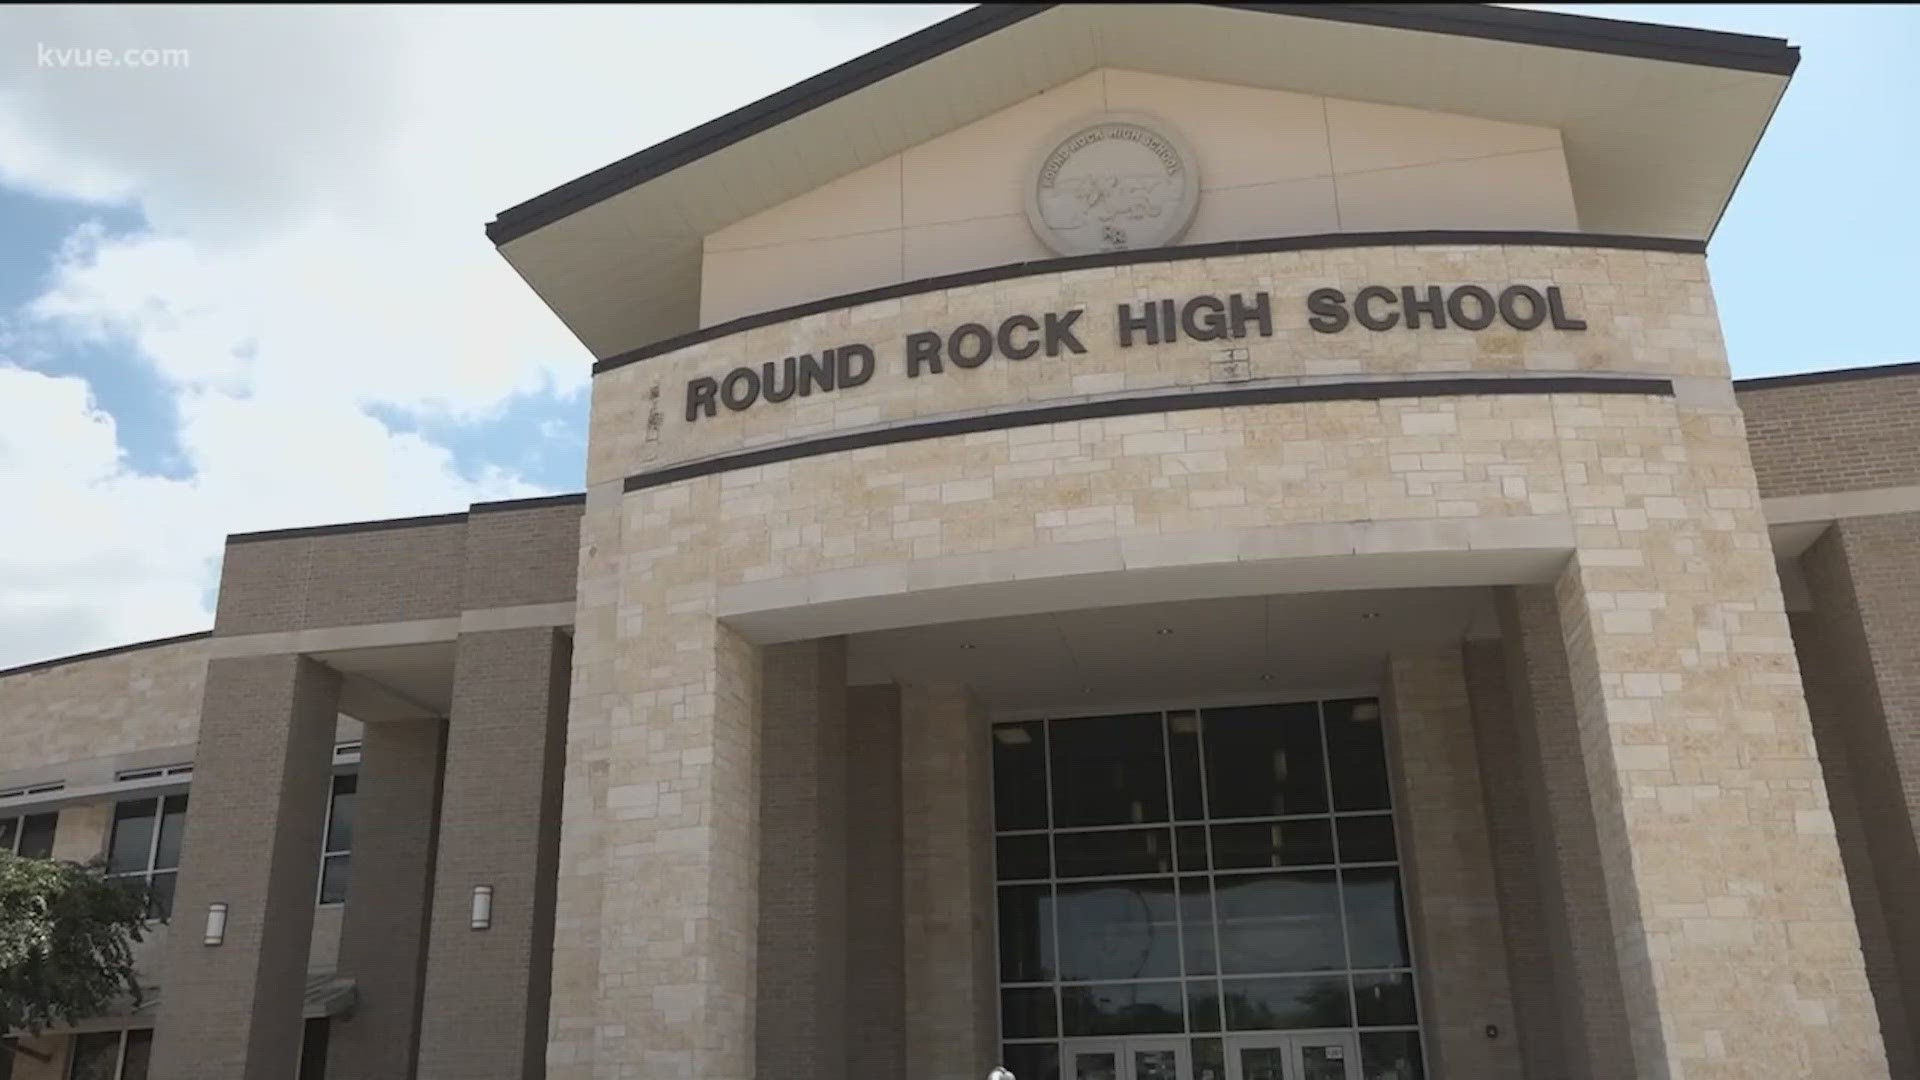 Round Rock ISD's first day of school is Aug. 15. And this year, classes will start five minutes earlier than usual.